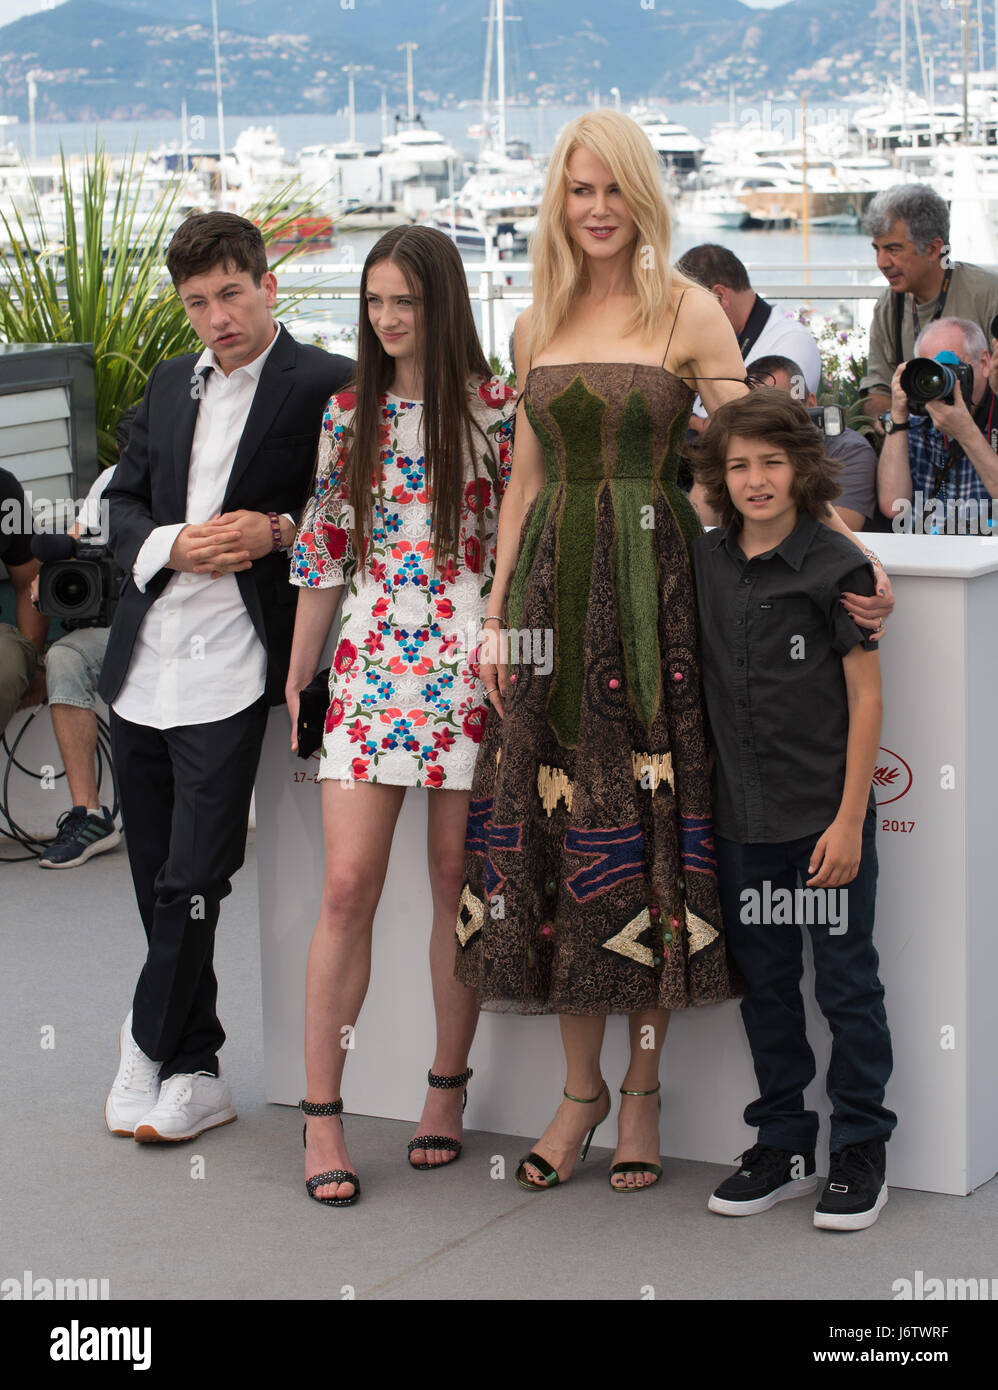 Cannes, France. 22nd May, 2017. Nicole Kidman, Raffey Cassidy, Barry Keoghan & Sunny Suljic at the photocall for 'The Killing of a Sacred Deer' at the 70th Festival de Cannes, Cannes, France. Stock Photo